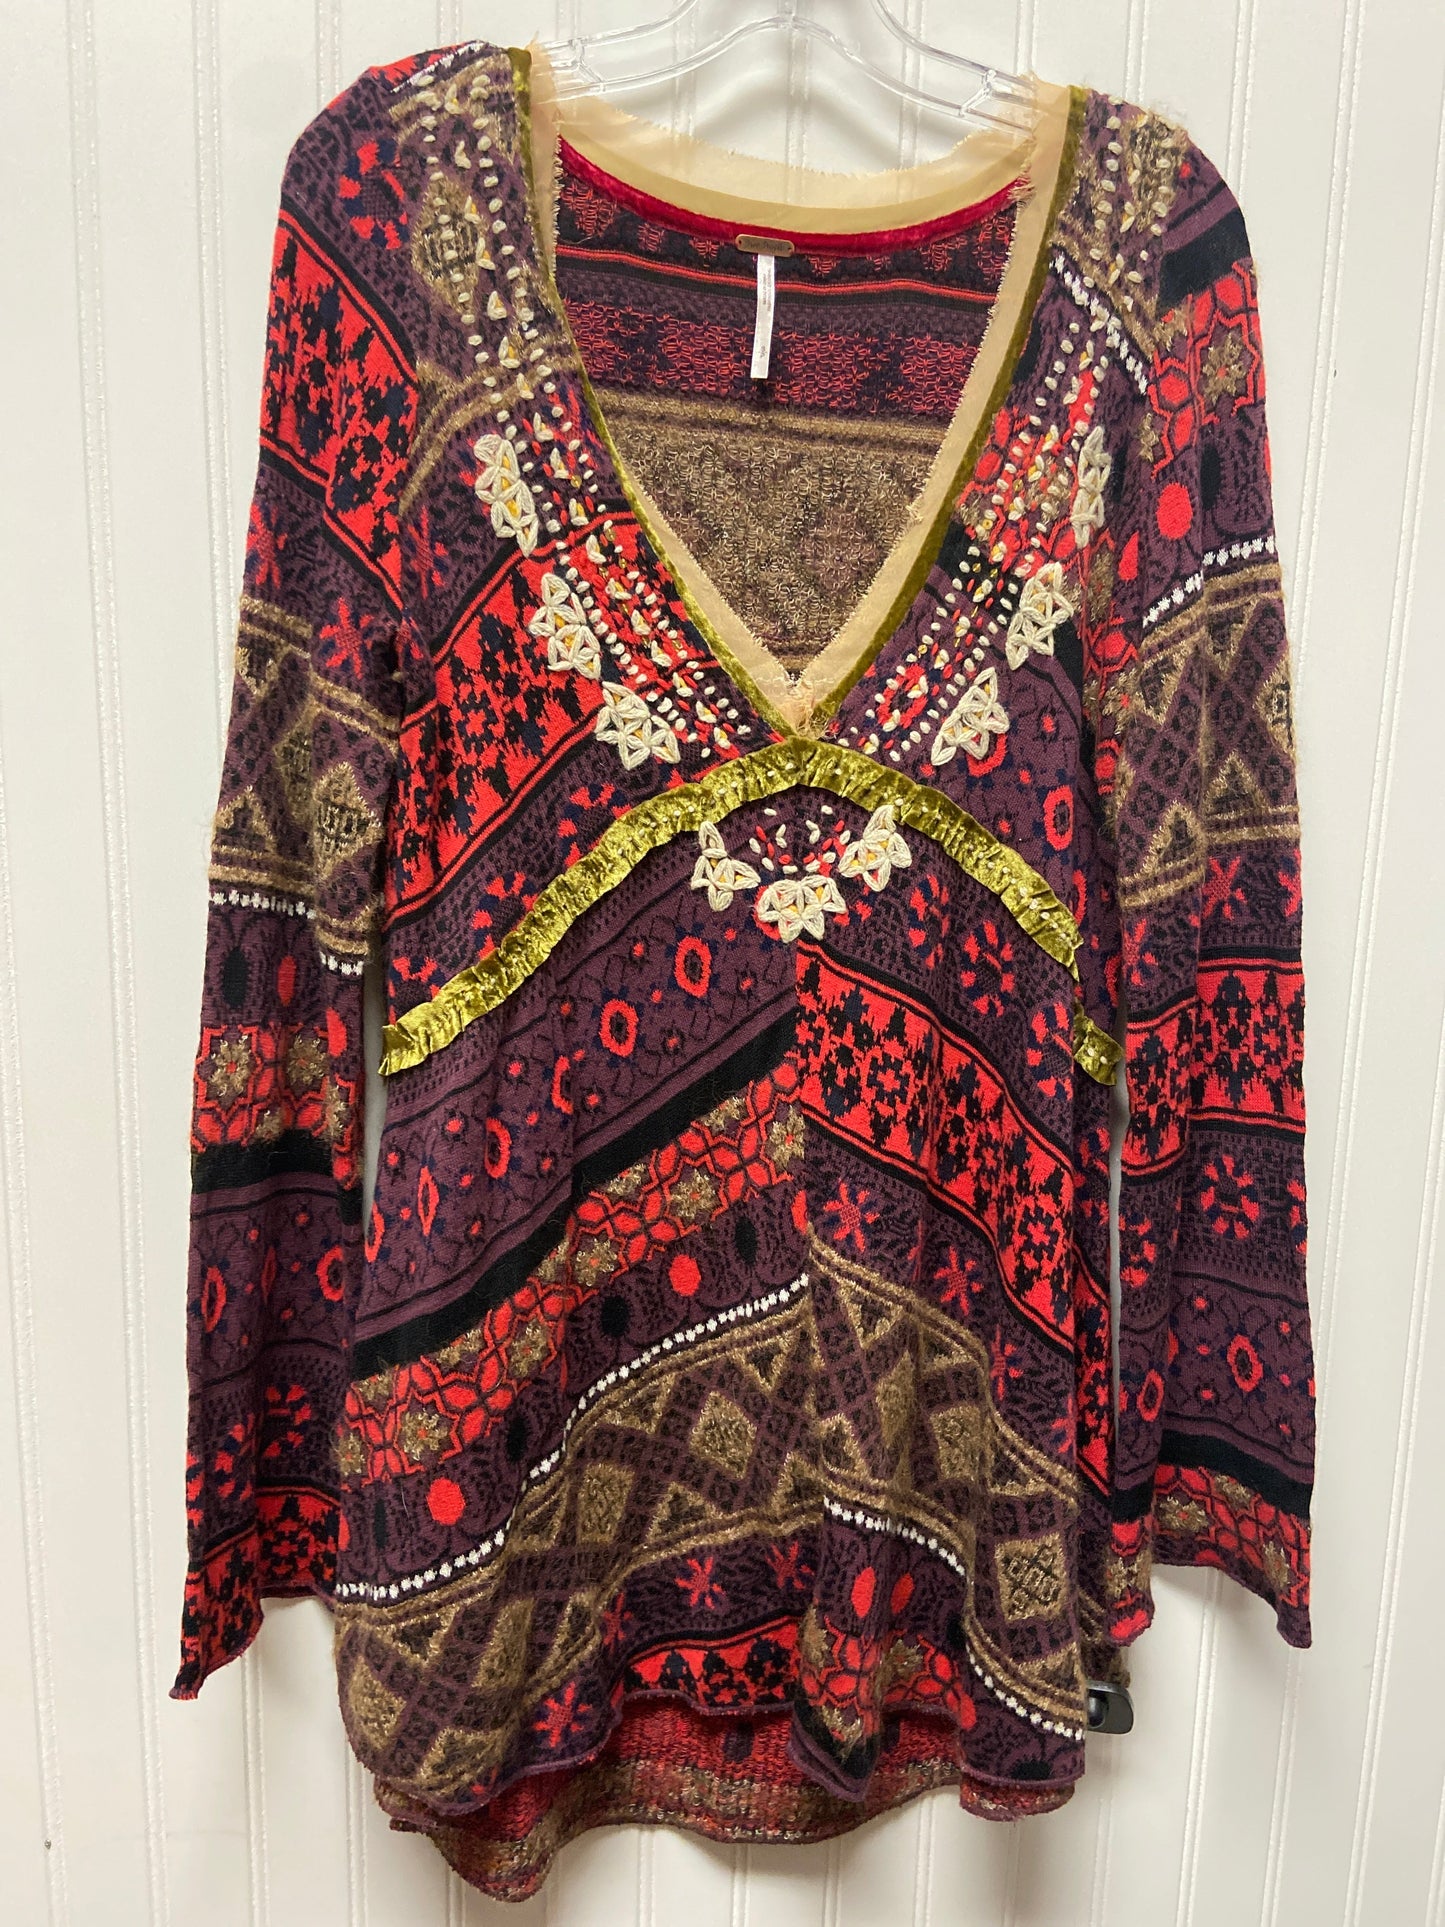 Multi-colored Top Long Sleeve Free People, Size Petite   S